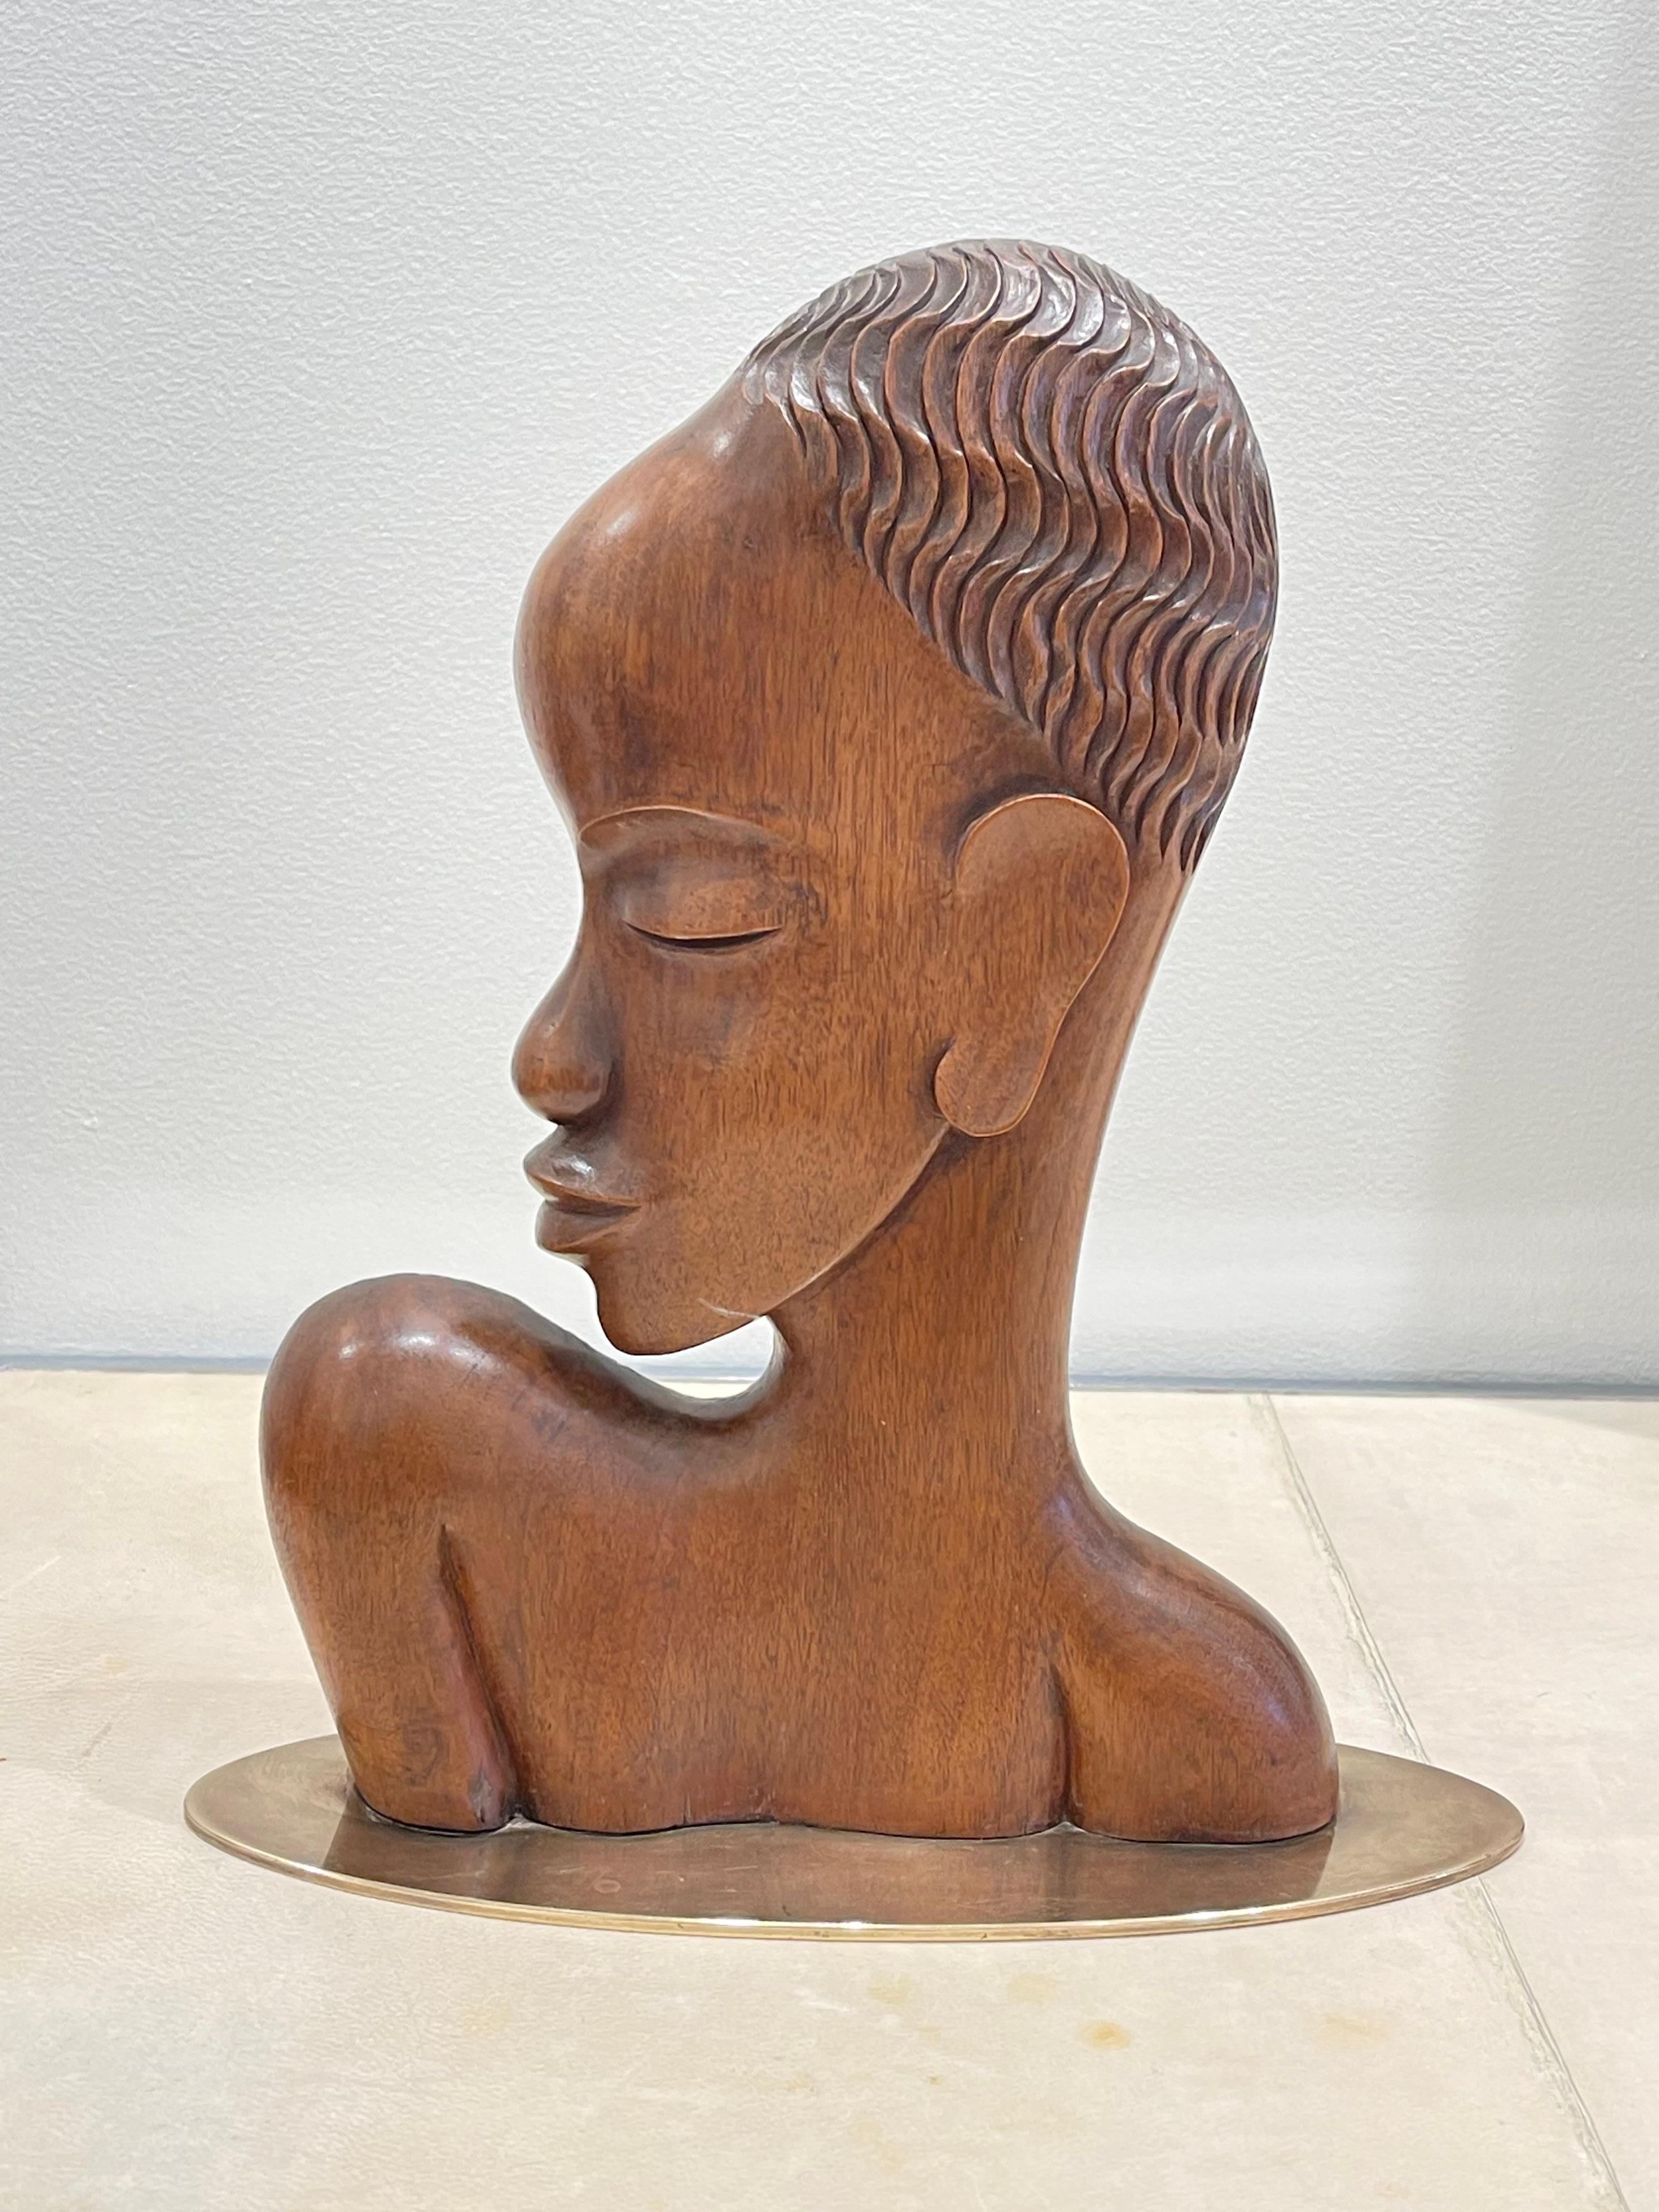 Very rare wooden sculpture (cherry tree wood) of an African lady by Karl Hagenauer (1898-1956). it is carved as a profile, made out of a single piece of wood on a flat oval brass base. This piece was carved circa 1930.
Signed under the base